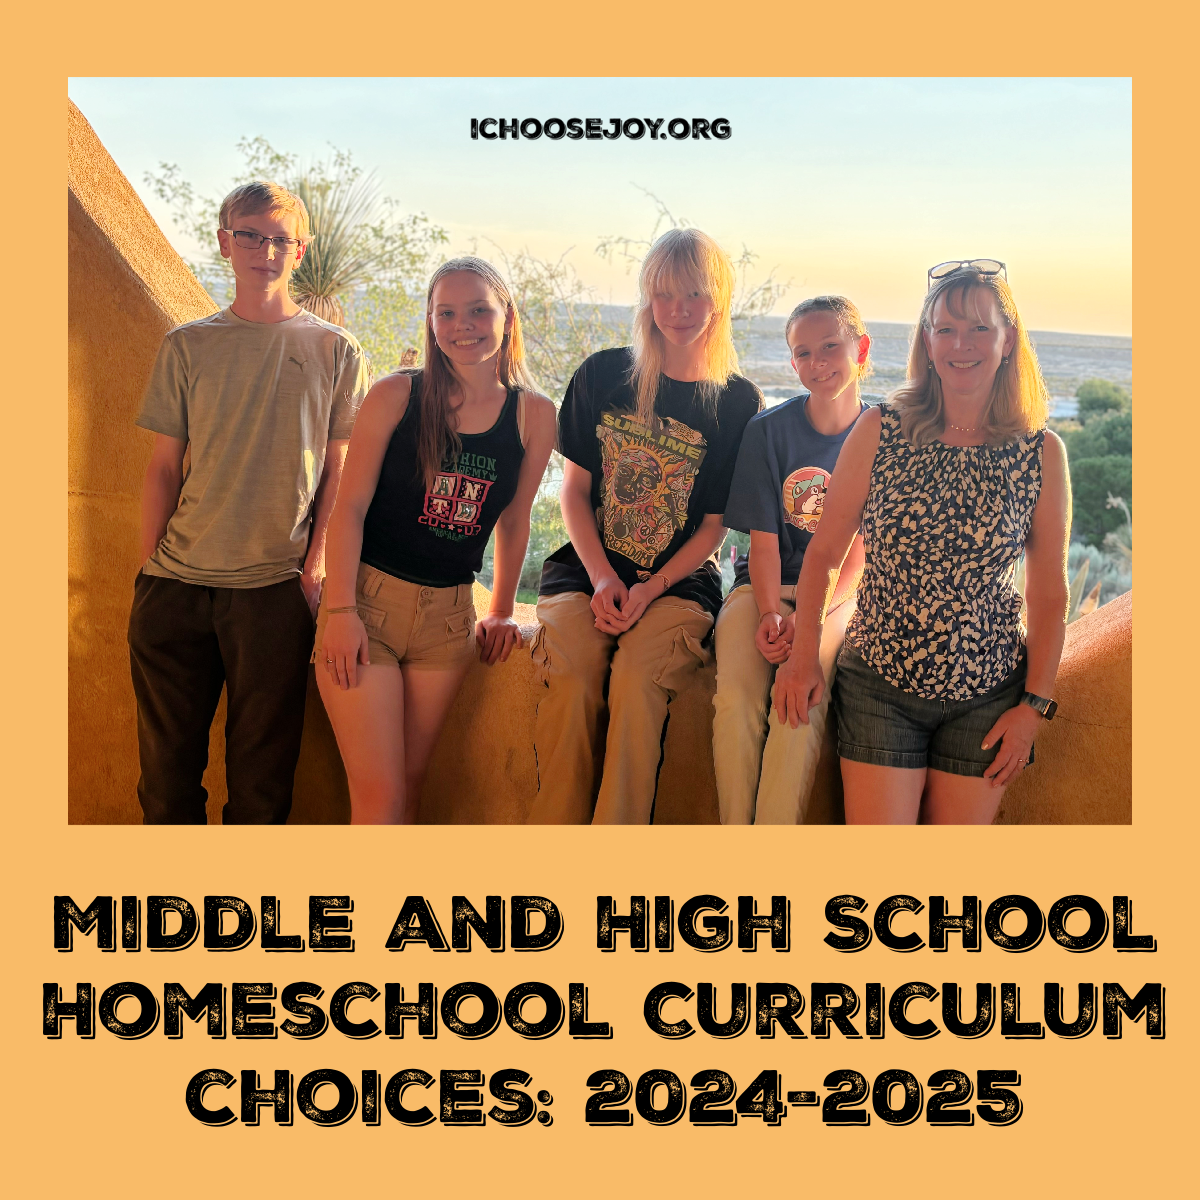 Middle and High School Homeschool Curriculum Choices for 2024-2025